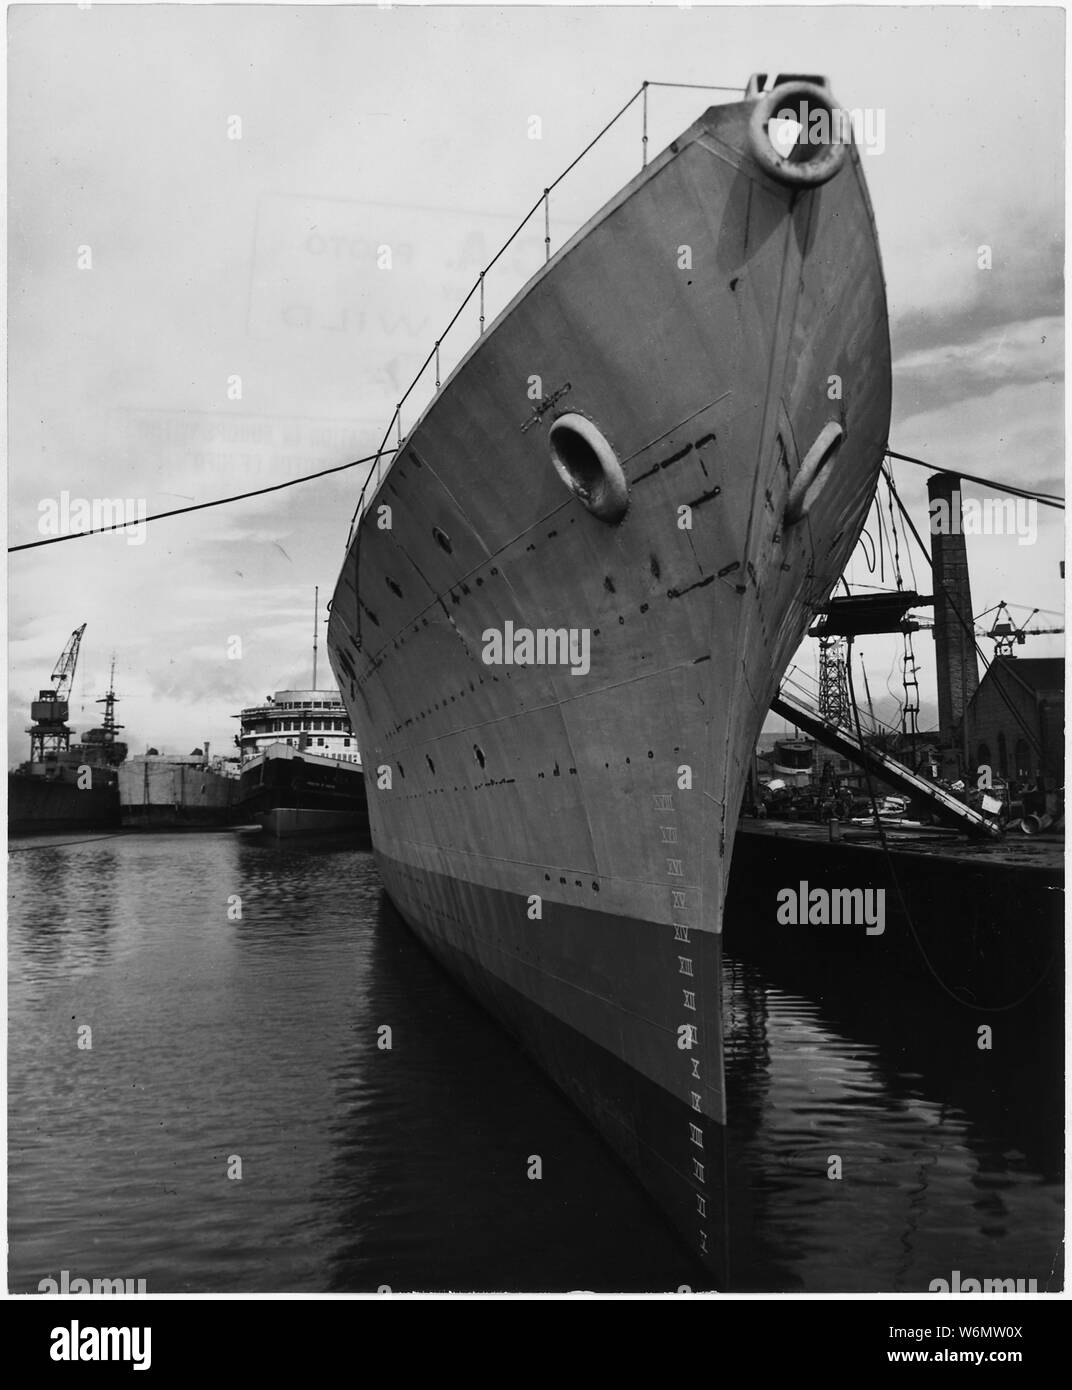 United Kingdom. Clydeban, Scotland. First British all-welded destroyer gets its finishing touches at the Clydebank yard of Fairfield Shipbuilding and Engineering Company, where 4,000 men work three shifts to keep the yard open all round the clock. The yard is also refitting old destroyers and building new oil tankers. Emphasis of naval program is on craft like destroyers, frigates, minesweepers which will meet the submarine menace Stock Photo